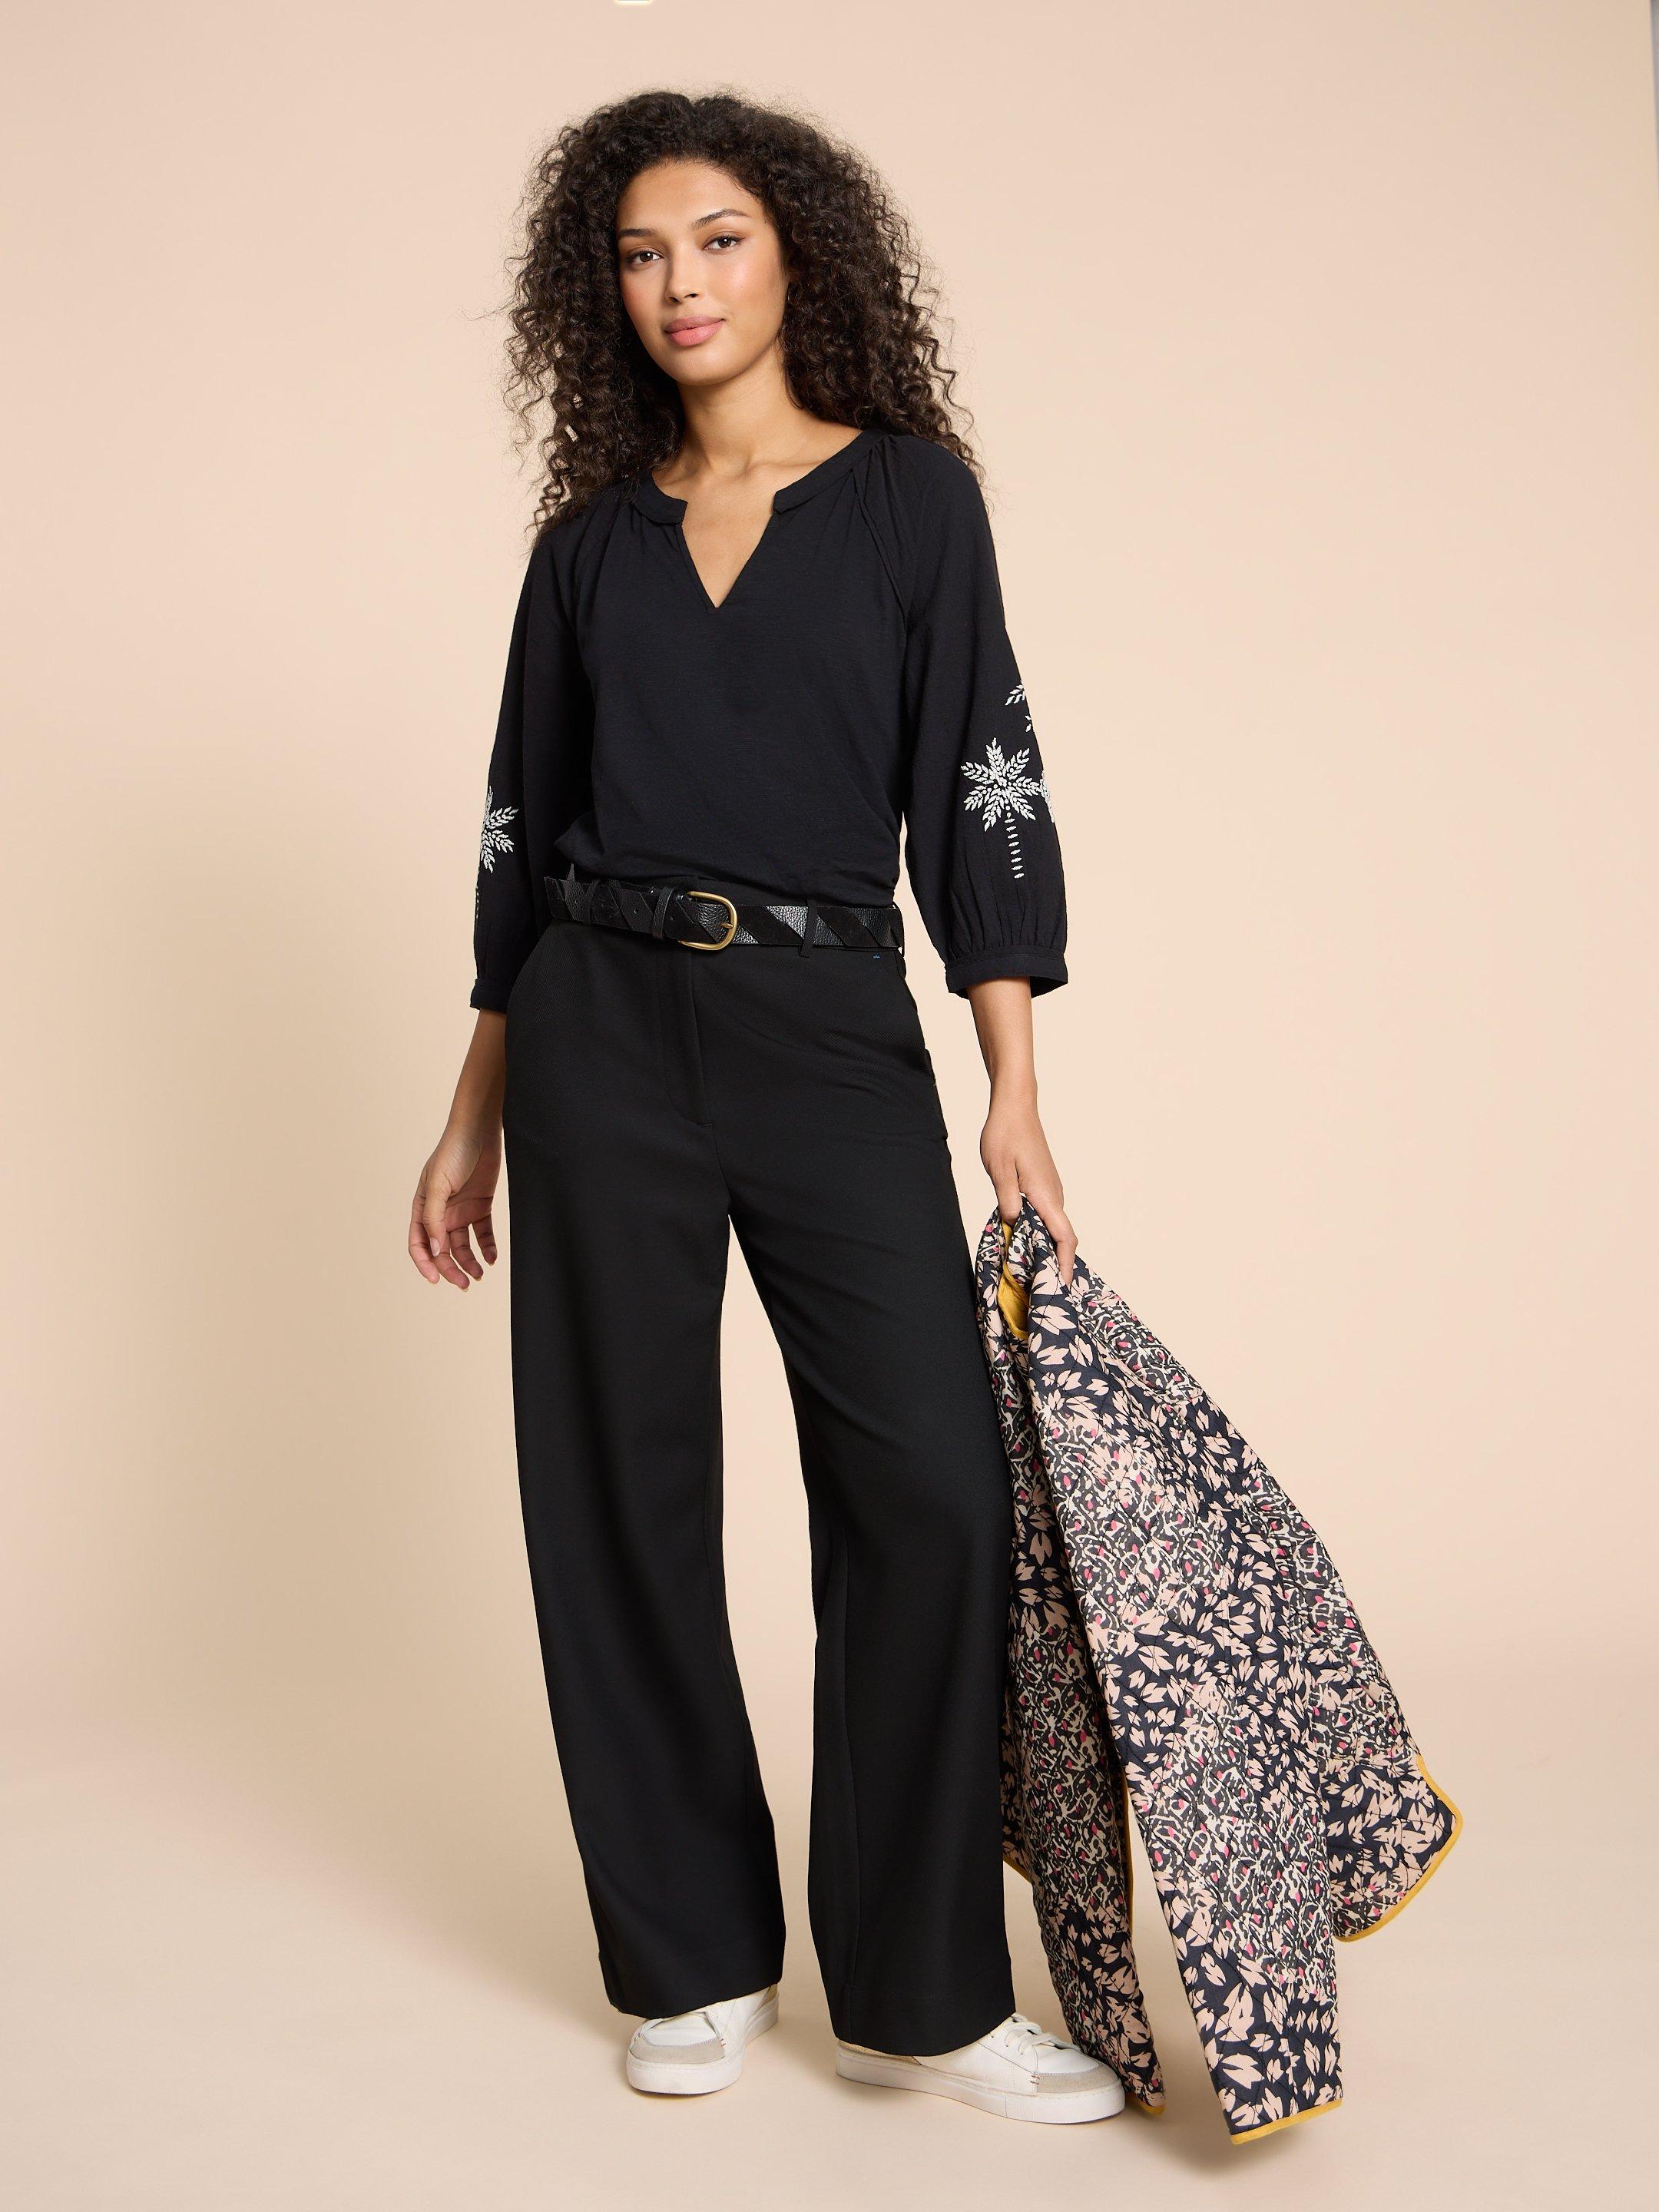 MILLIE MIX EMBROIDERED TOP in BLK MLT - MODEL FRONT